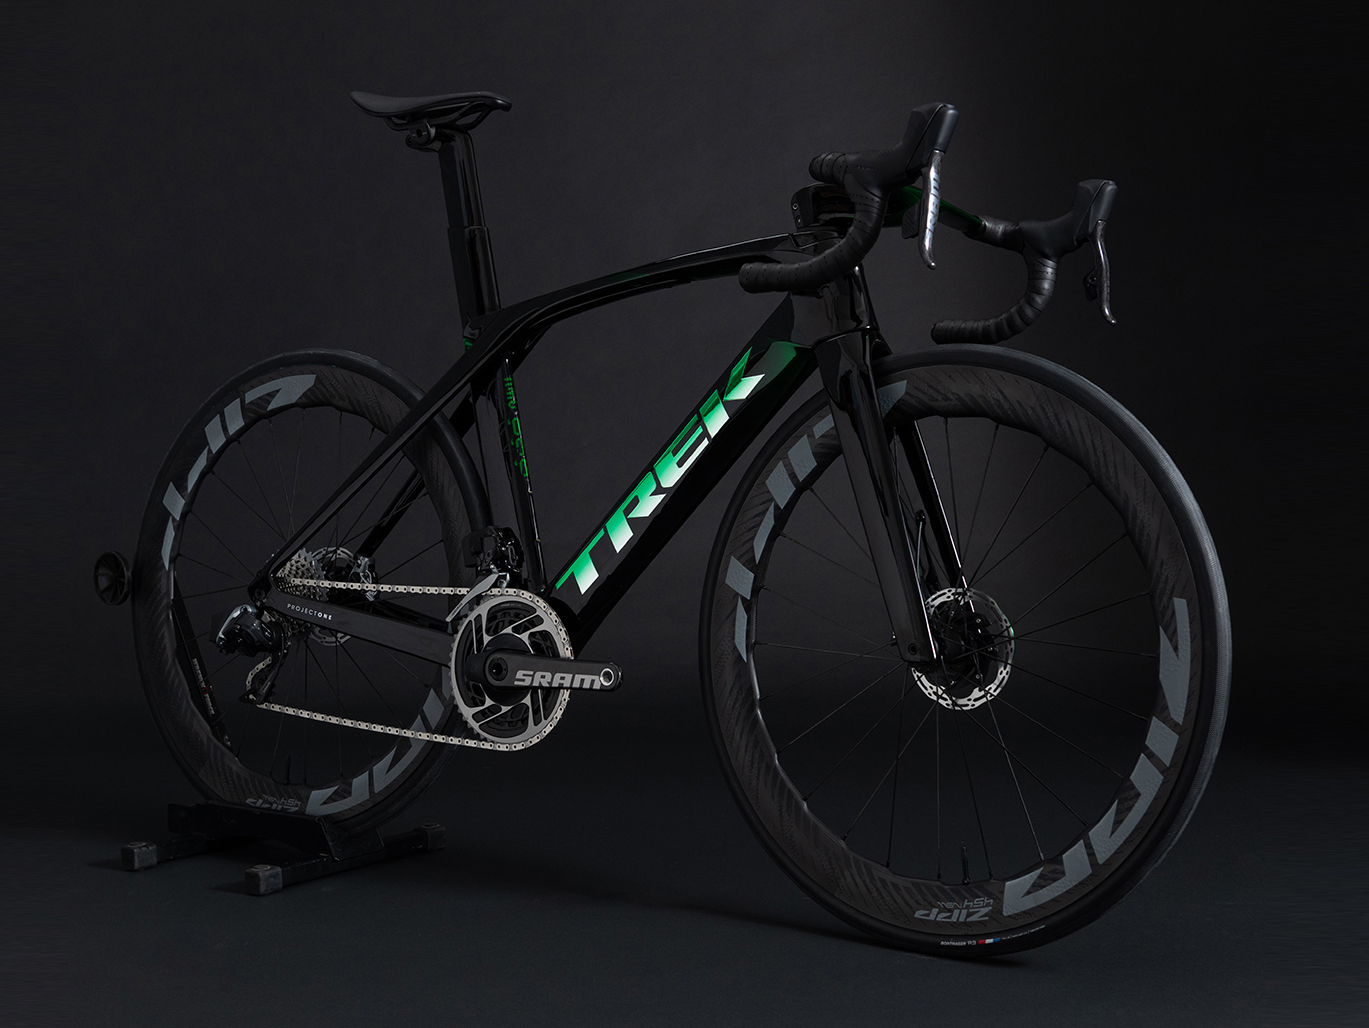 Robbie's Project 1 Ultimate Madone with a black background.